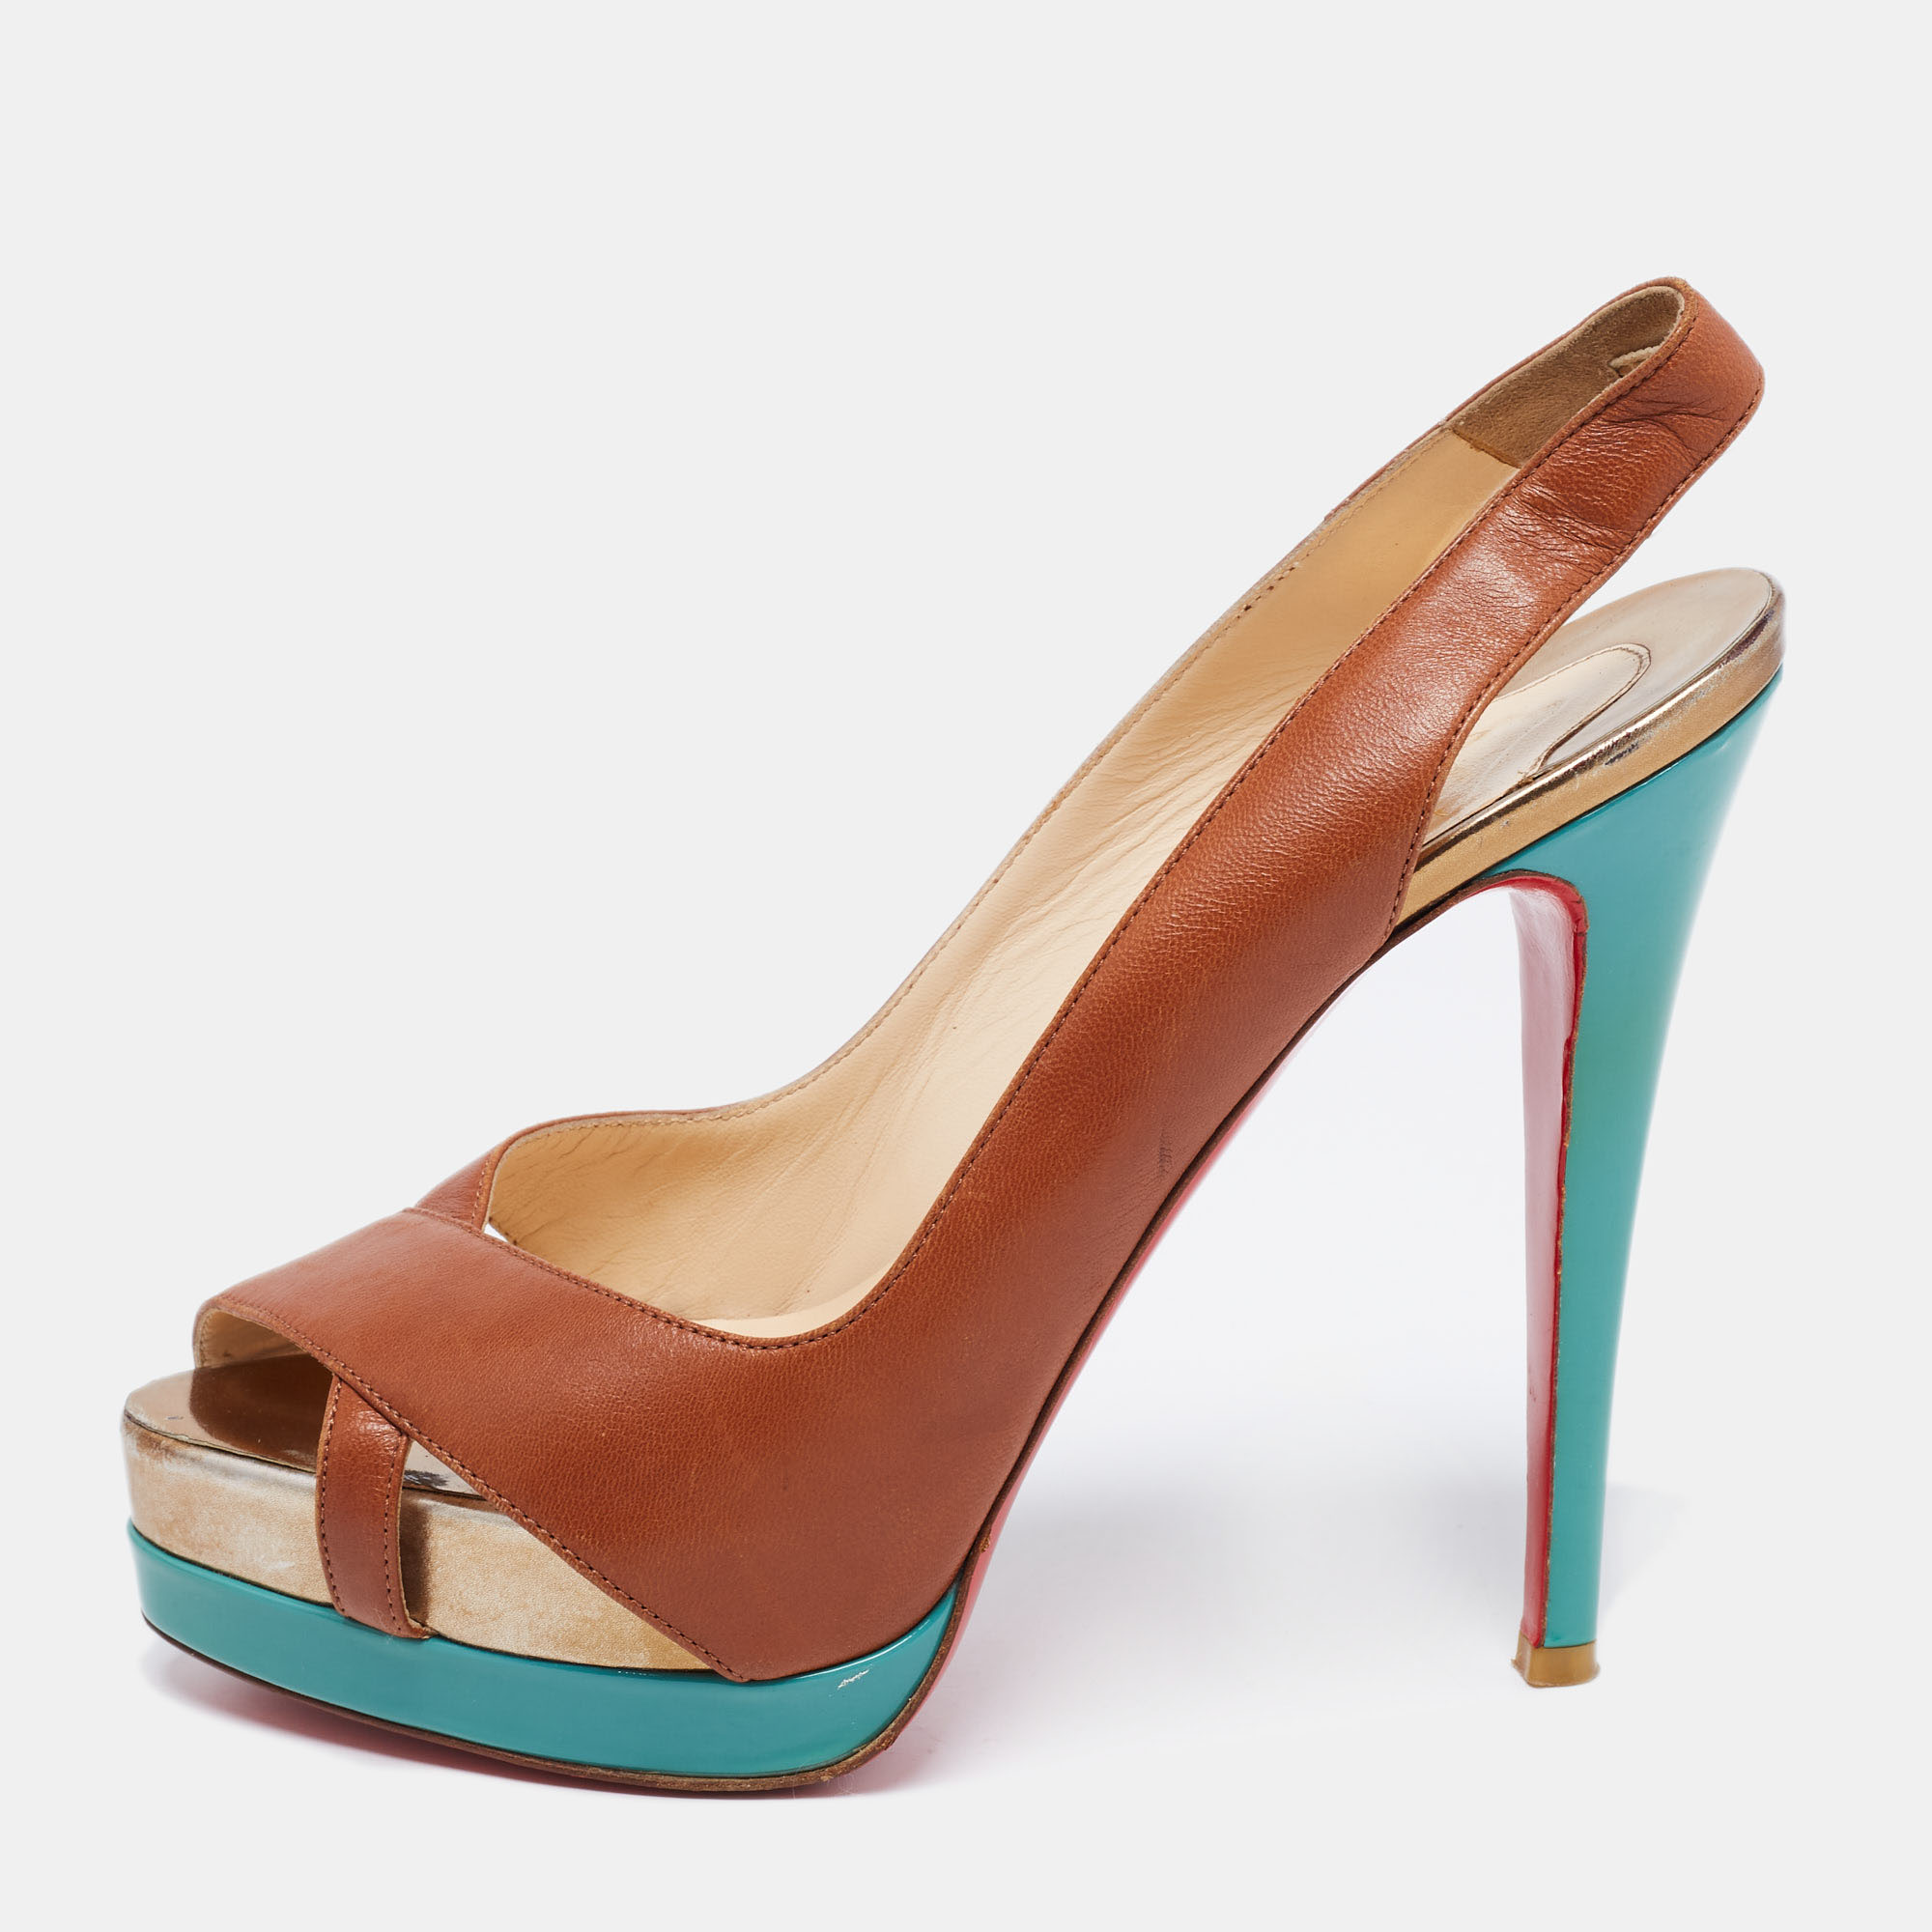 Walk with elegance and confidence in these Very Croise pumps from the House of Christian Louboutin. Crafted using brown leather these pumps display peep toes slender 13 cm heels platforms and a slingback. From formal to dressy these stunning CL pumps are the perfect fit to look classy in